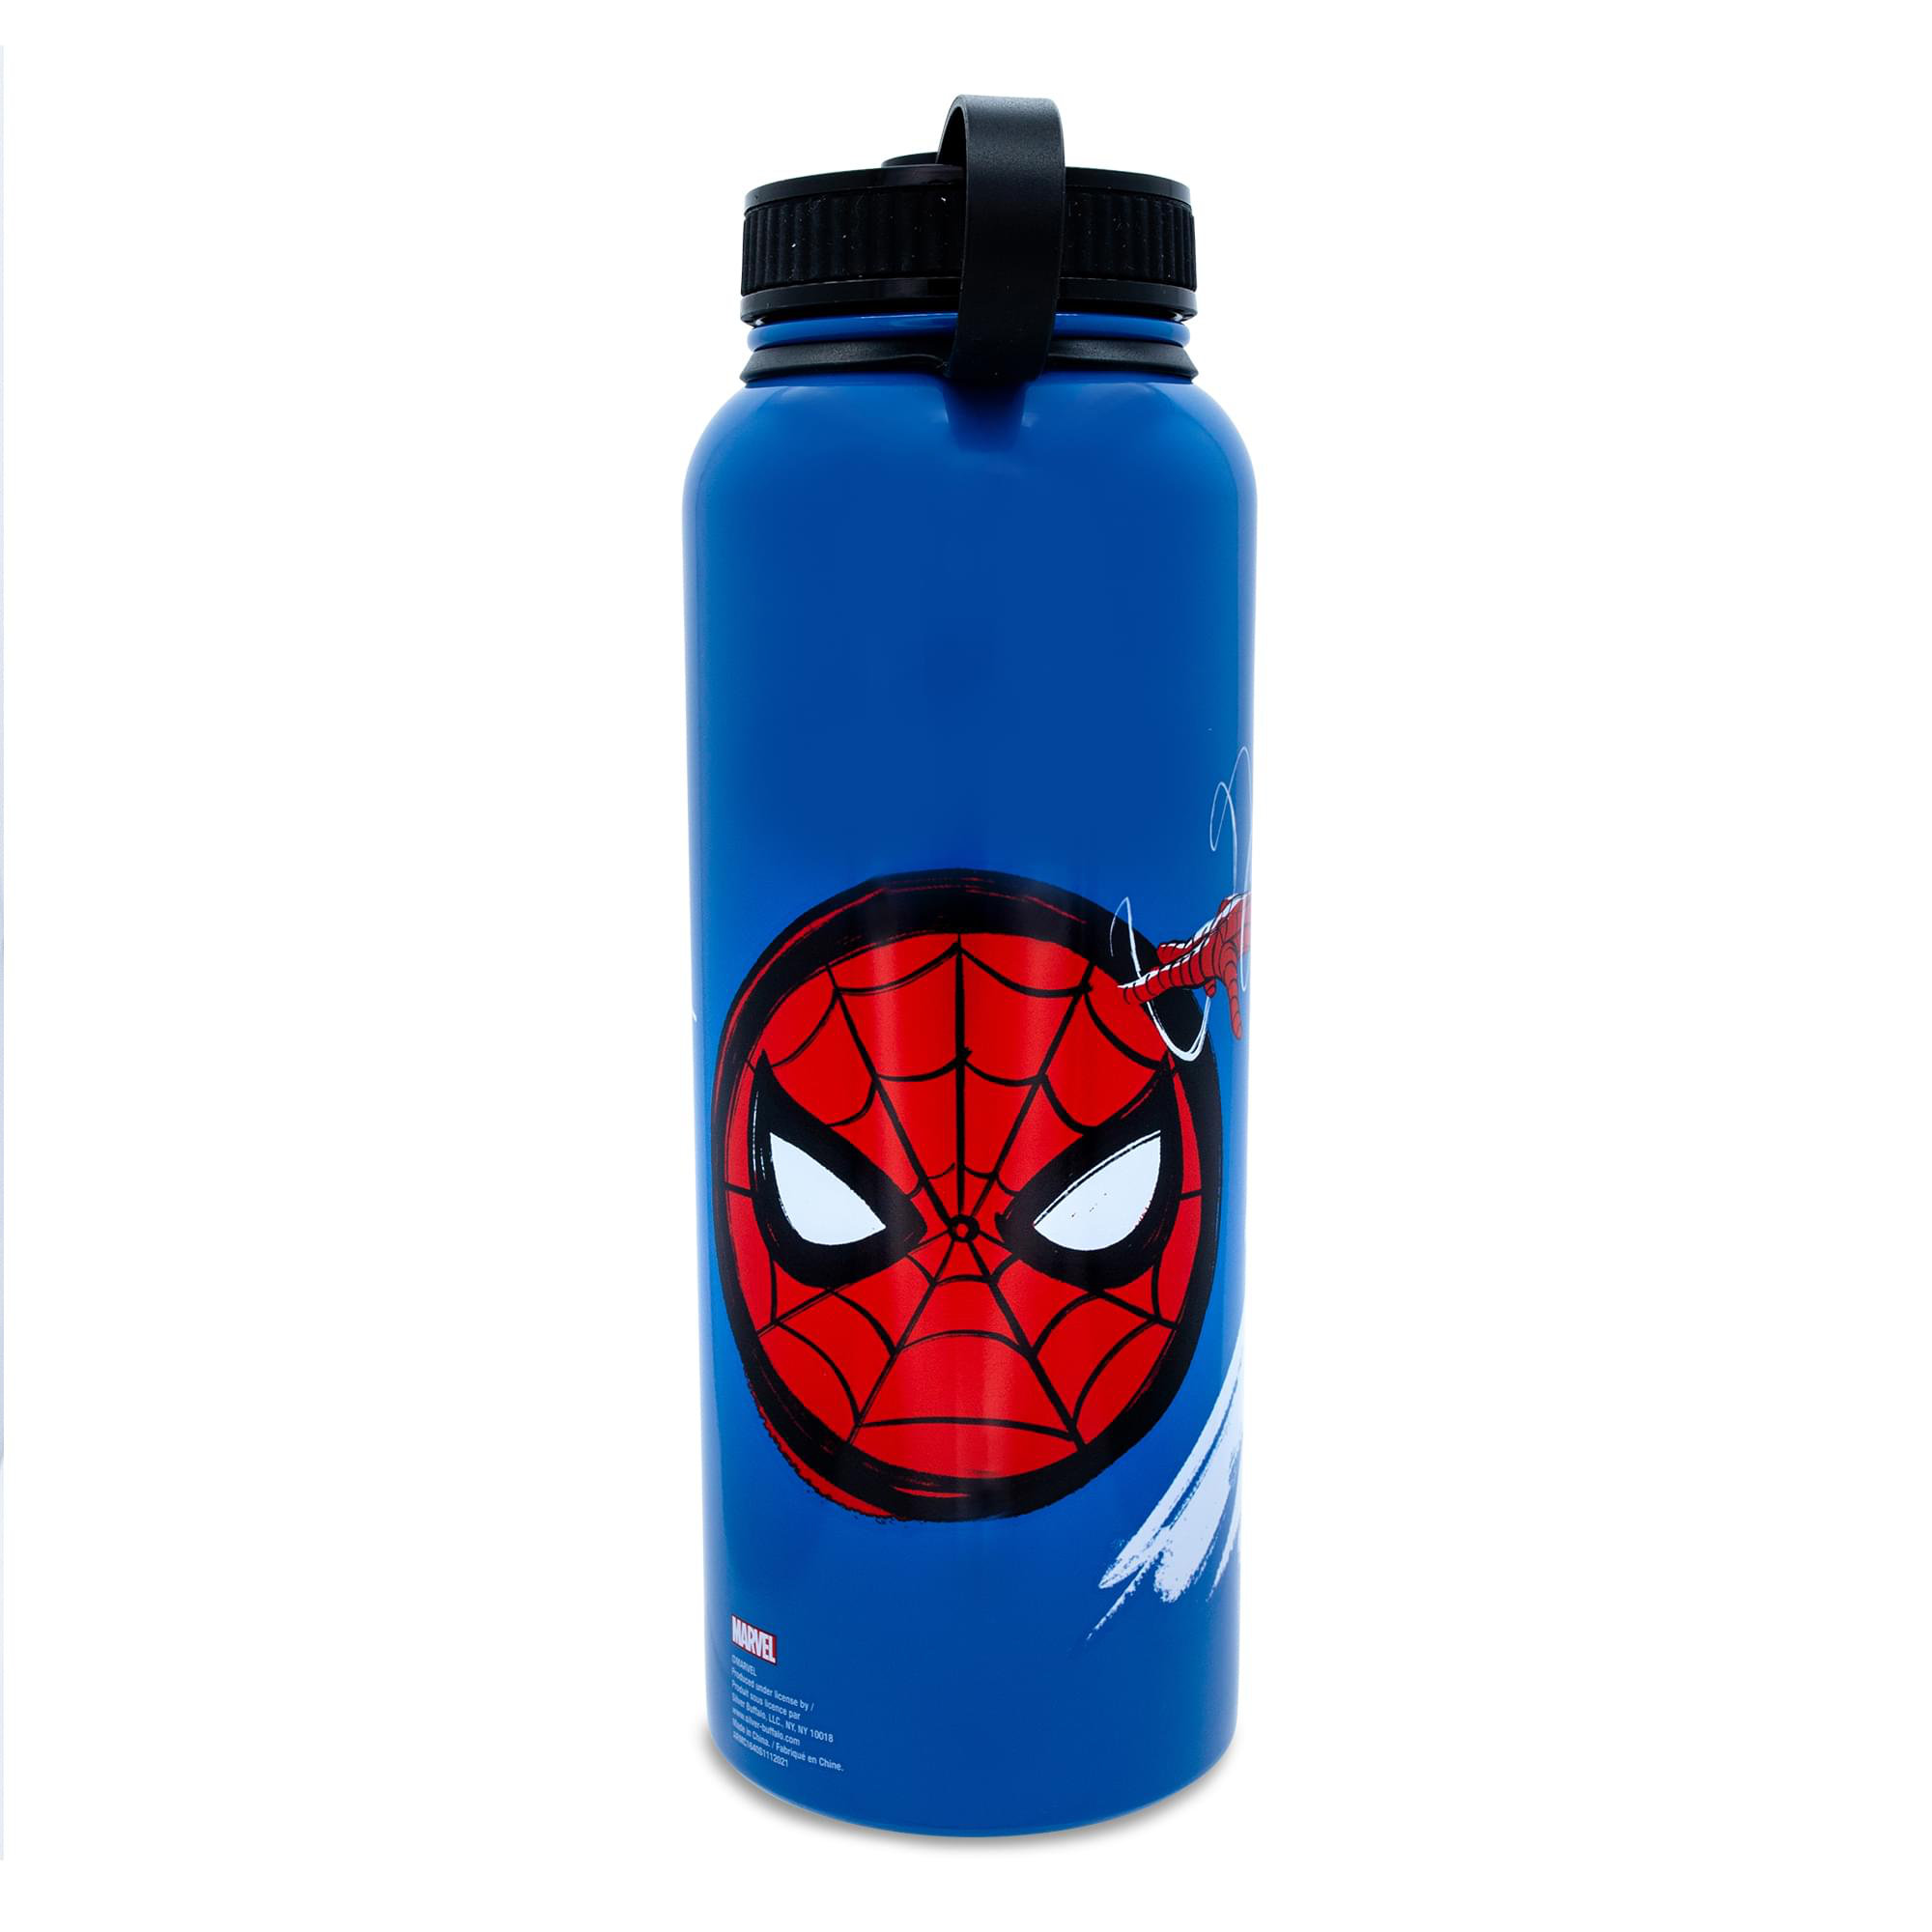 Silver Buffalo 42oz. Insulated Stainless Steel Water Bottle